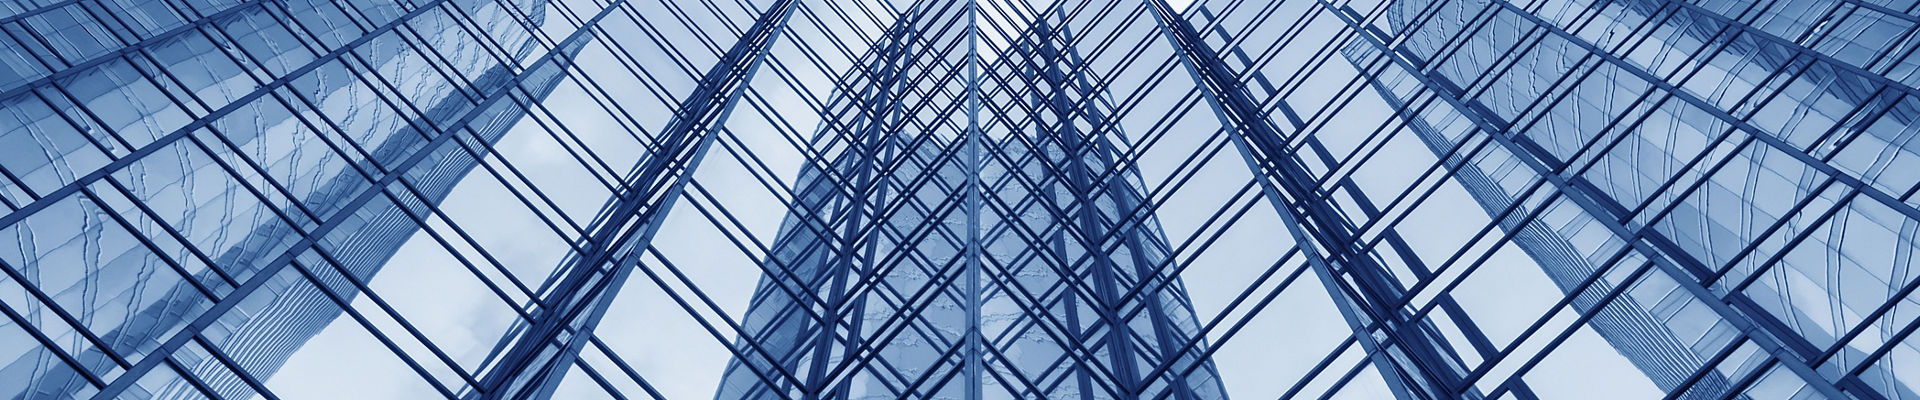 Looking up at the glass façade of a modern office building